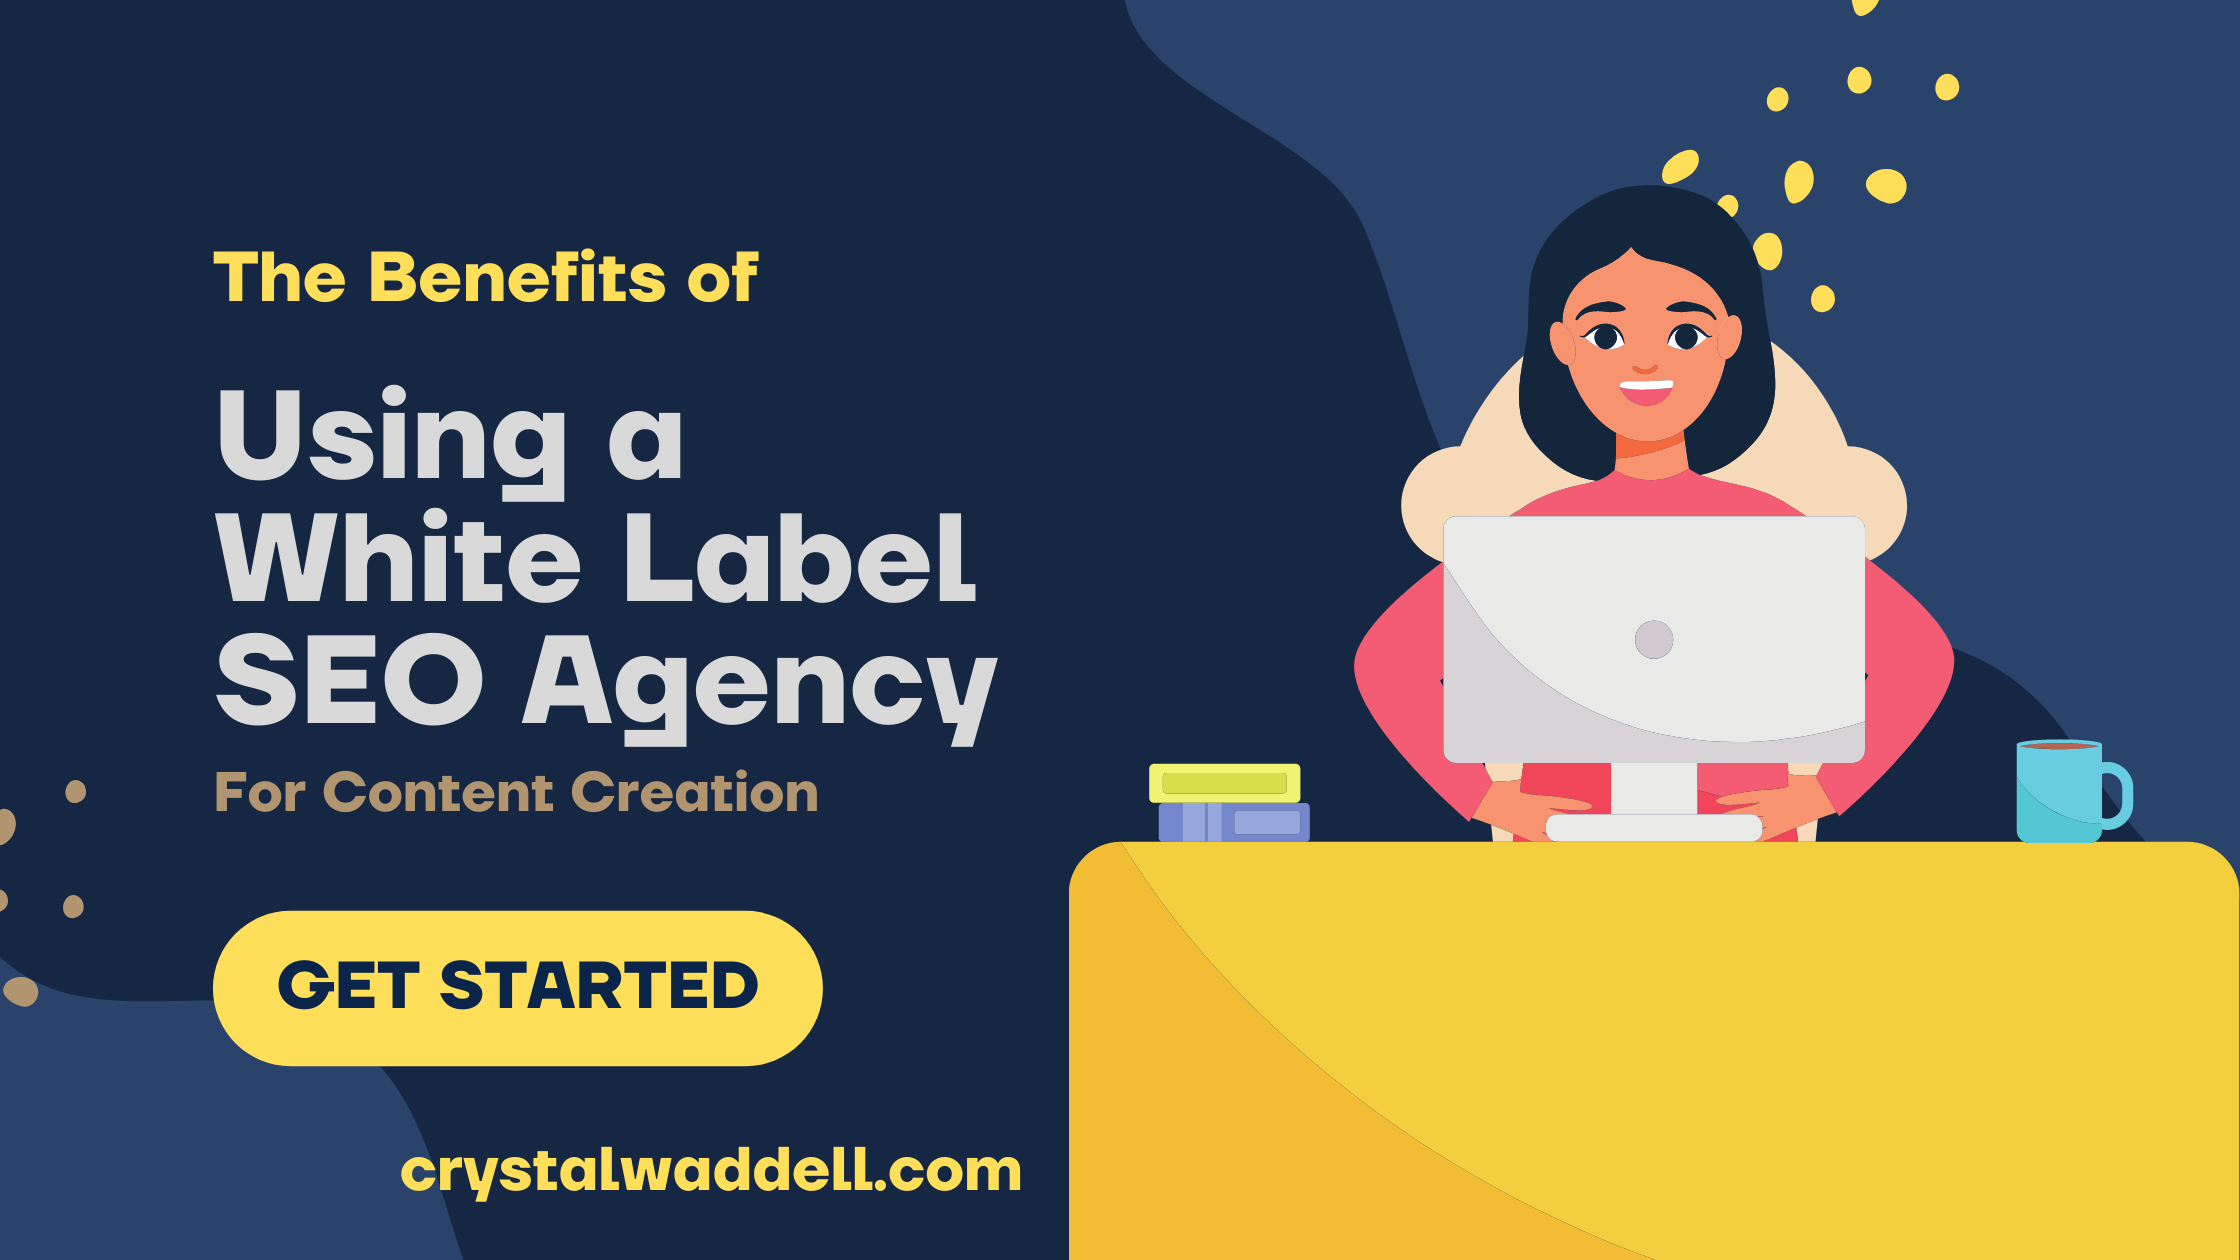 At CrystalWaddell.com, our white label SEO company is built upon quality content creation.